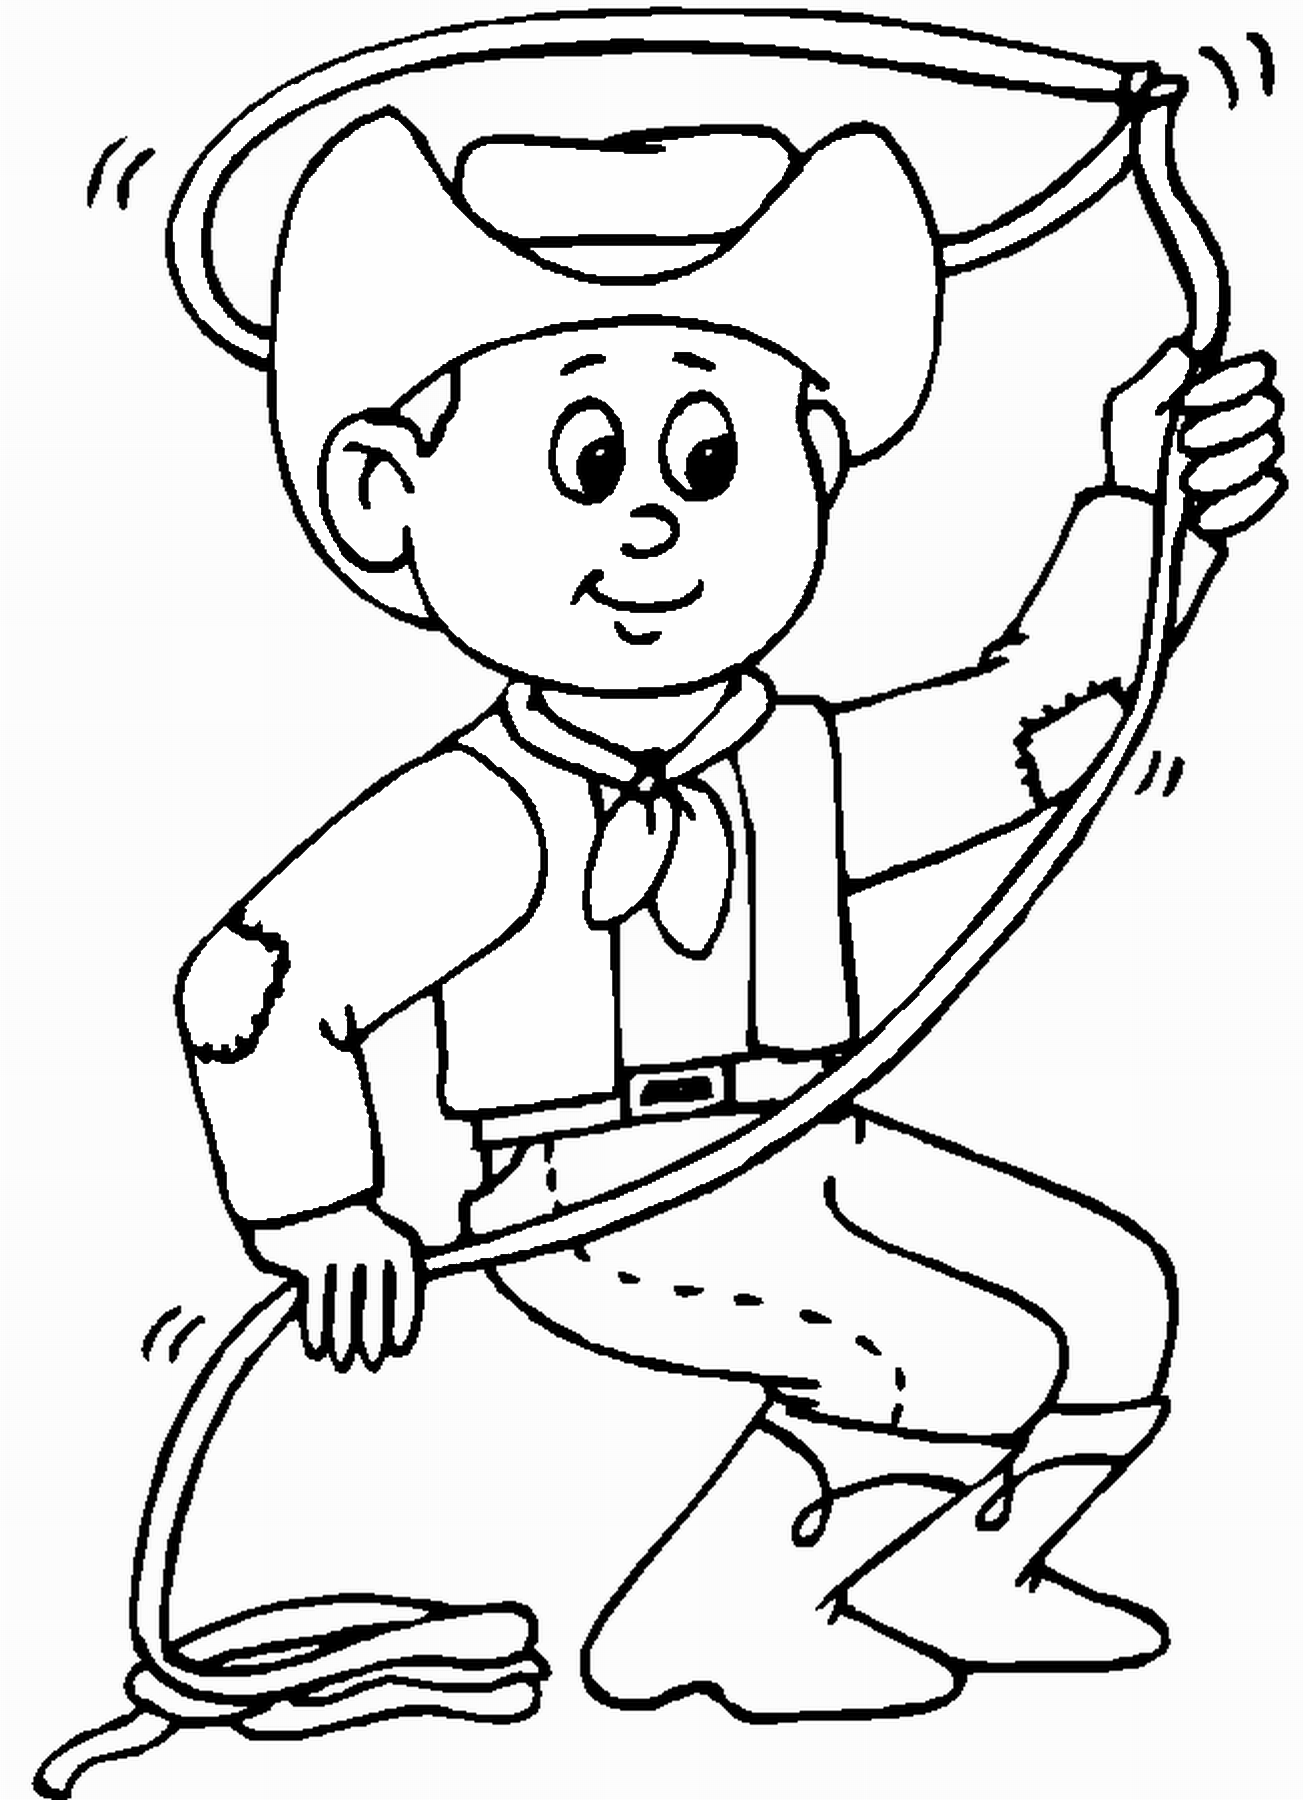 Cowboy Coloring Pages for boys cowboy_41 Printable 2020 0192 Coloring4free